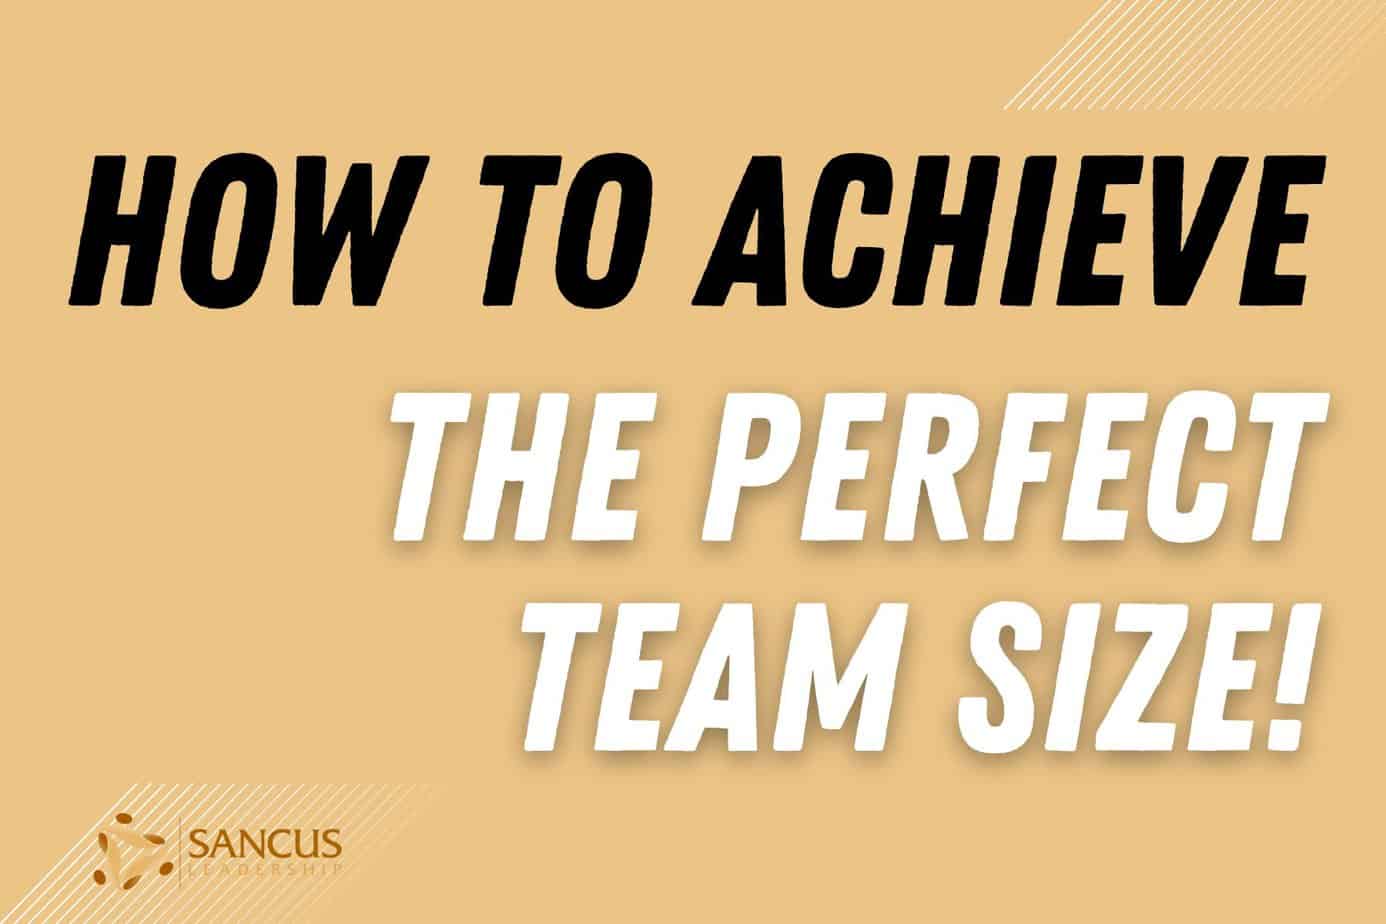 15 Hints That Your Team Size Needs To Change!